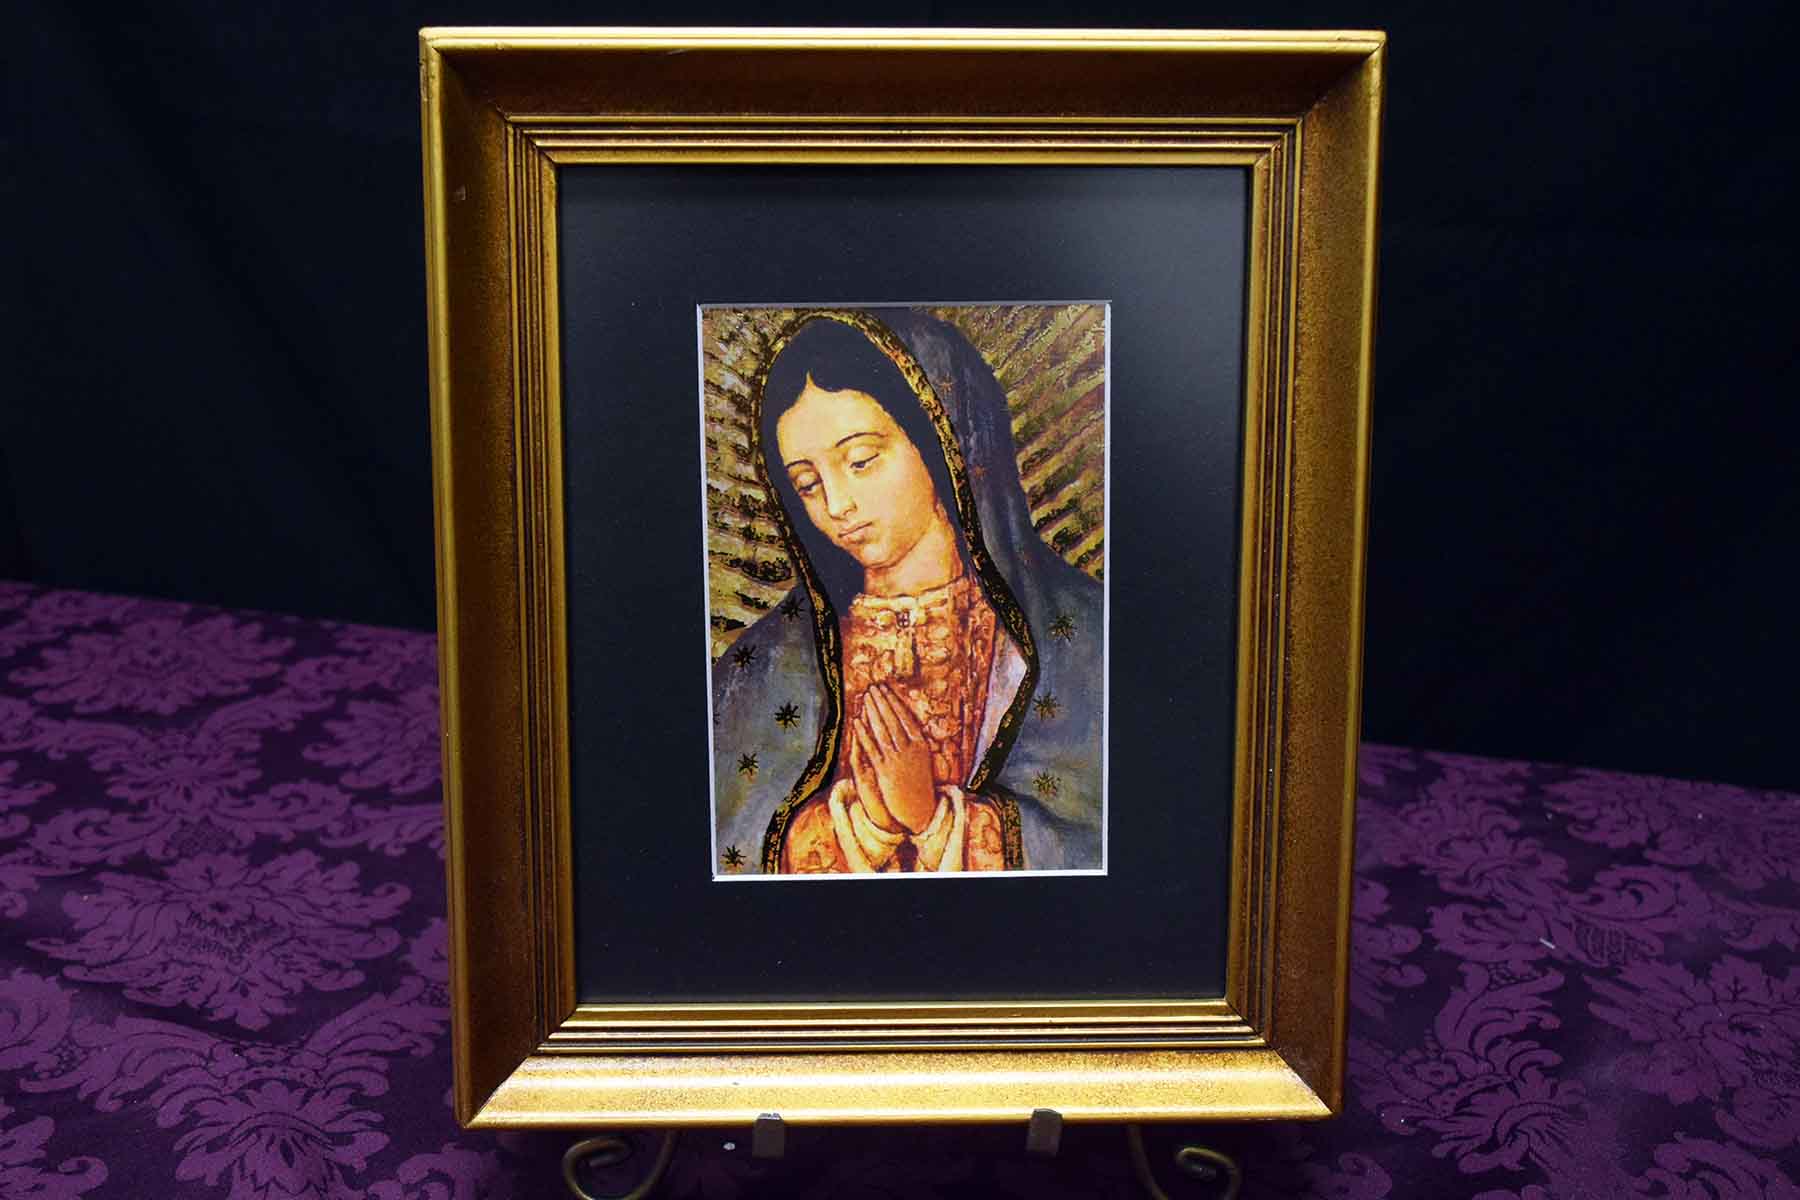 R32_Our_Lady_of_Guadalupe_with_gold_frame_-_CCMLpic-R.jpg